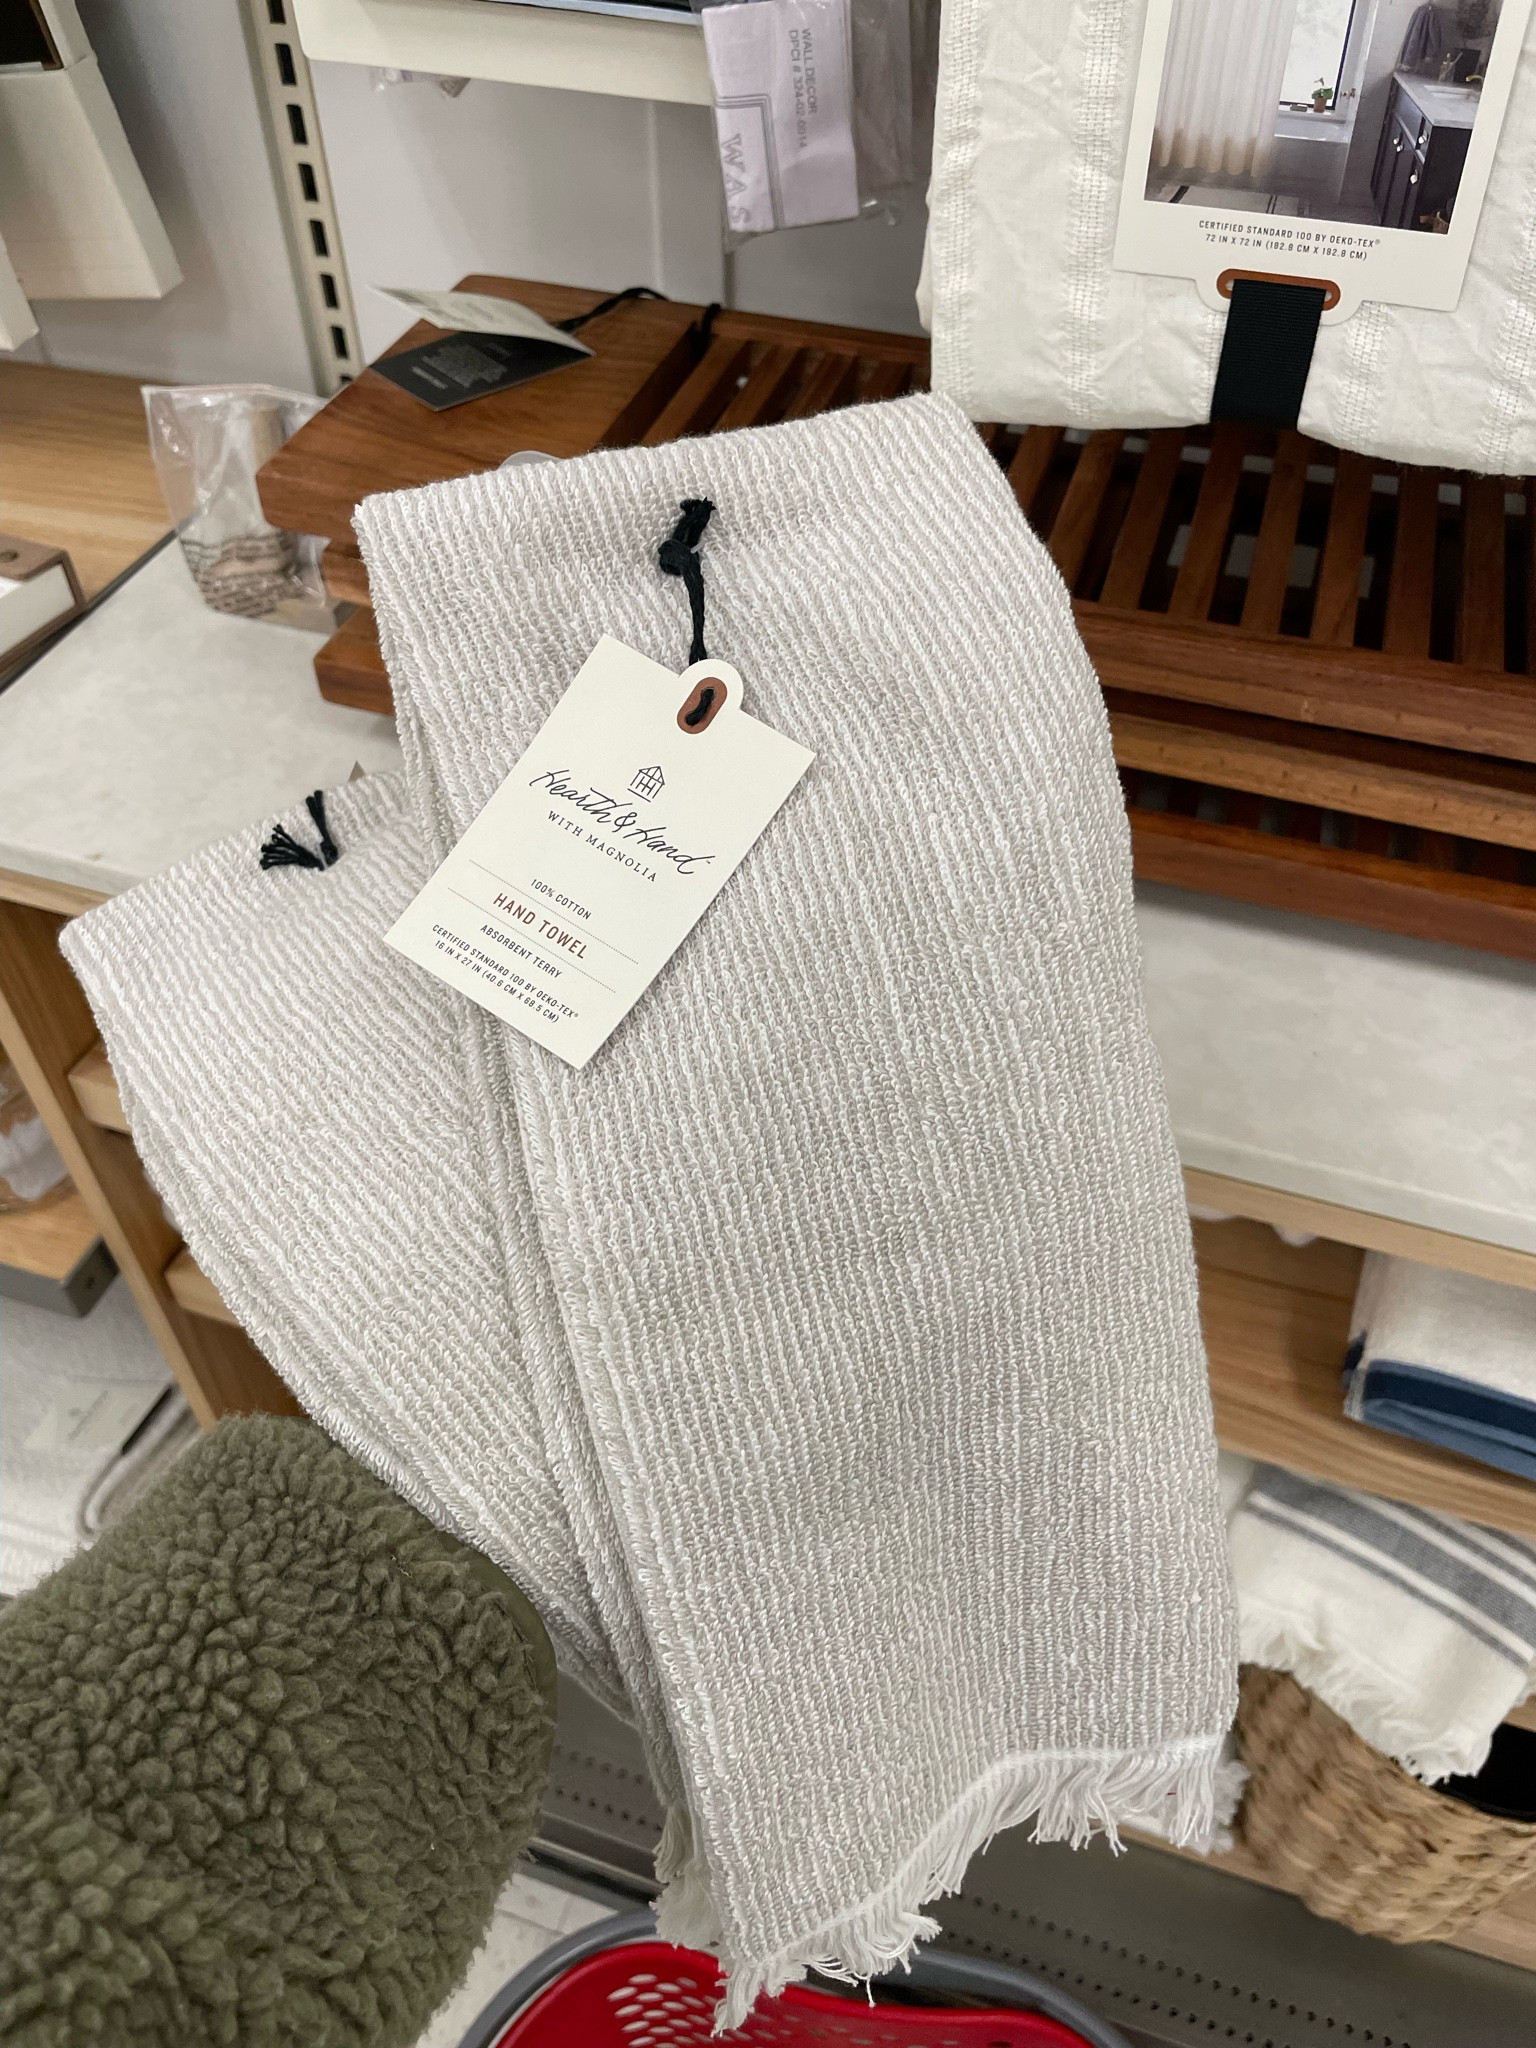 Microstripe Terry Cotton Hand Towel Taupe - Hearth & Hand with Magnolia